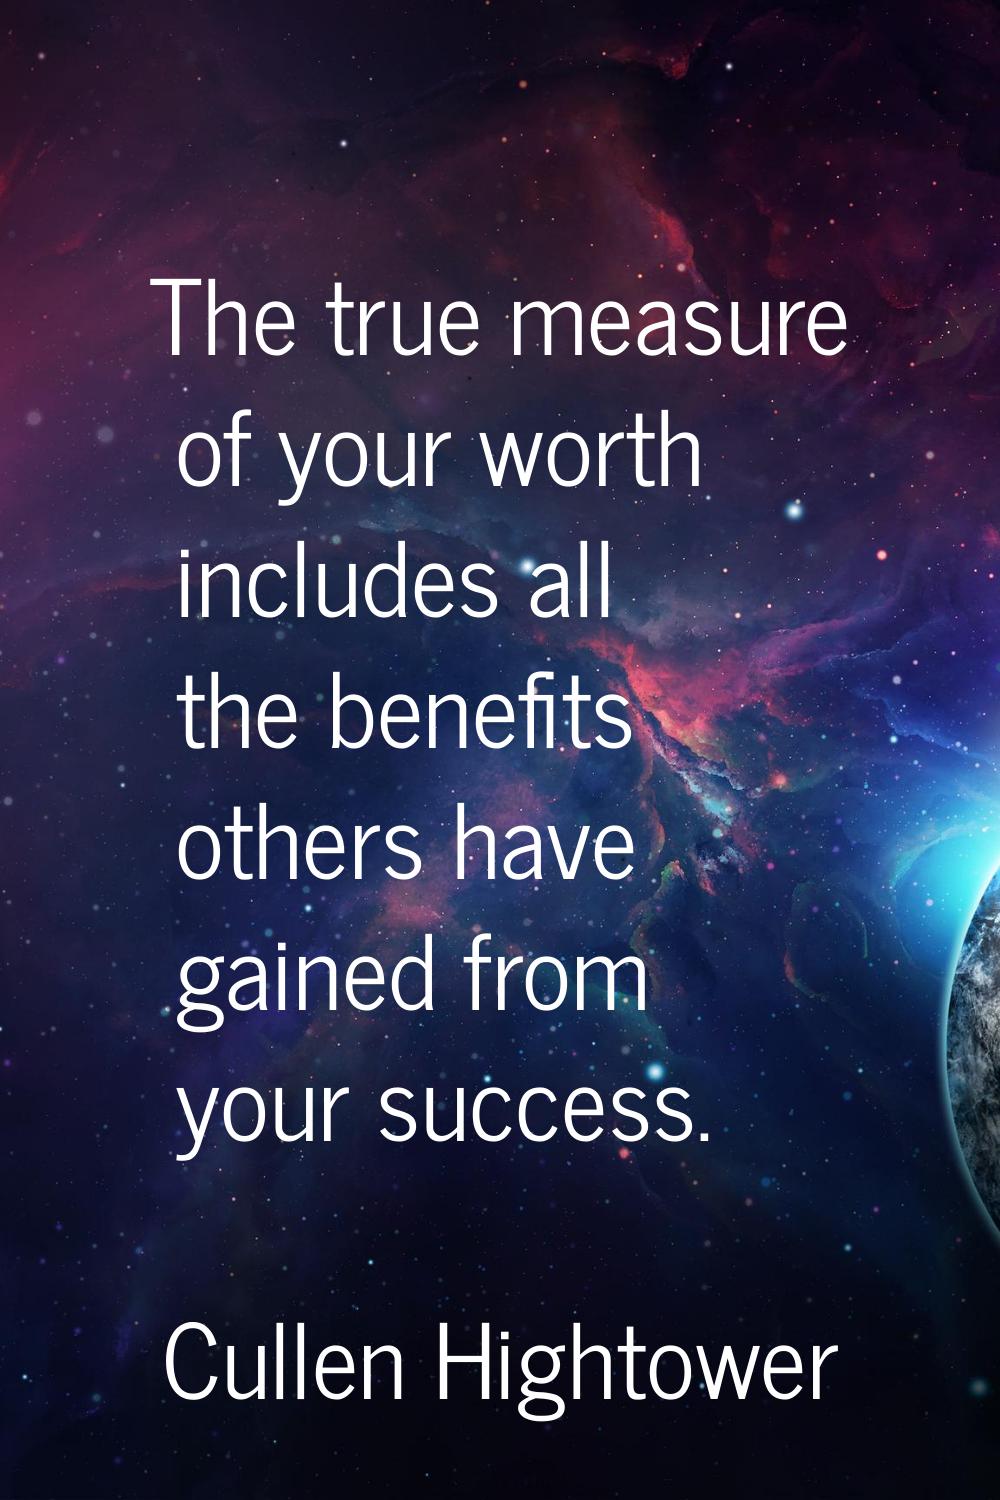 The true measure of your worth includes all the benefits others have gained from your success.